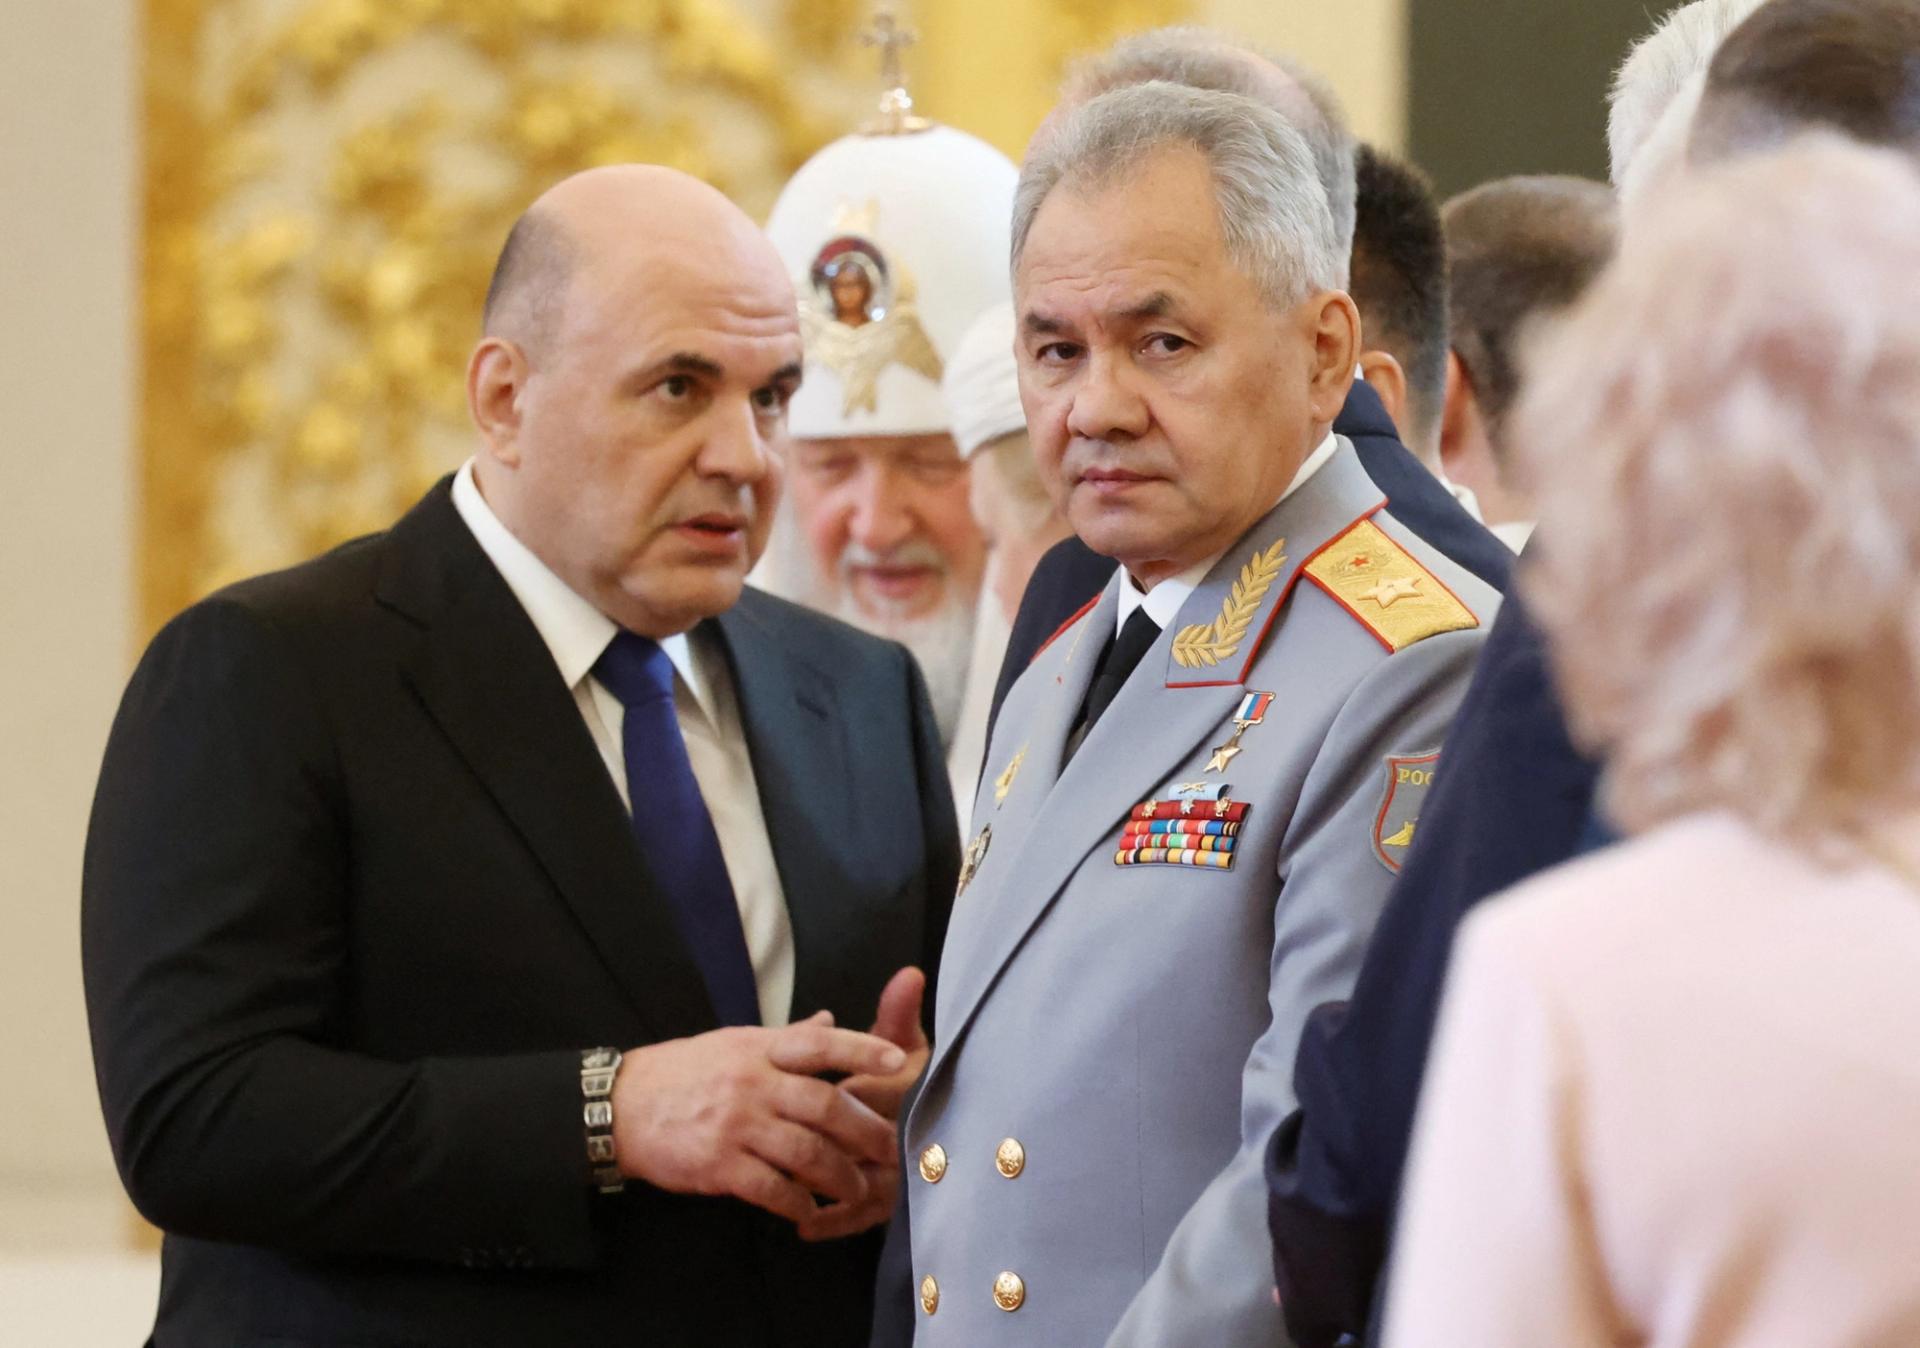 Russian Prime Minister Mikhail Mishustin and Defence Minister Sergei Shoigu wait before a ceremony inaugurating Vladimir Putin as President of Russia at the Kremlin in Moscow, Russia May 7, 2024. Sputnik/Alexander Kazakov/Pool via REUTERS